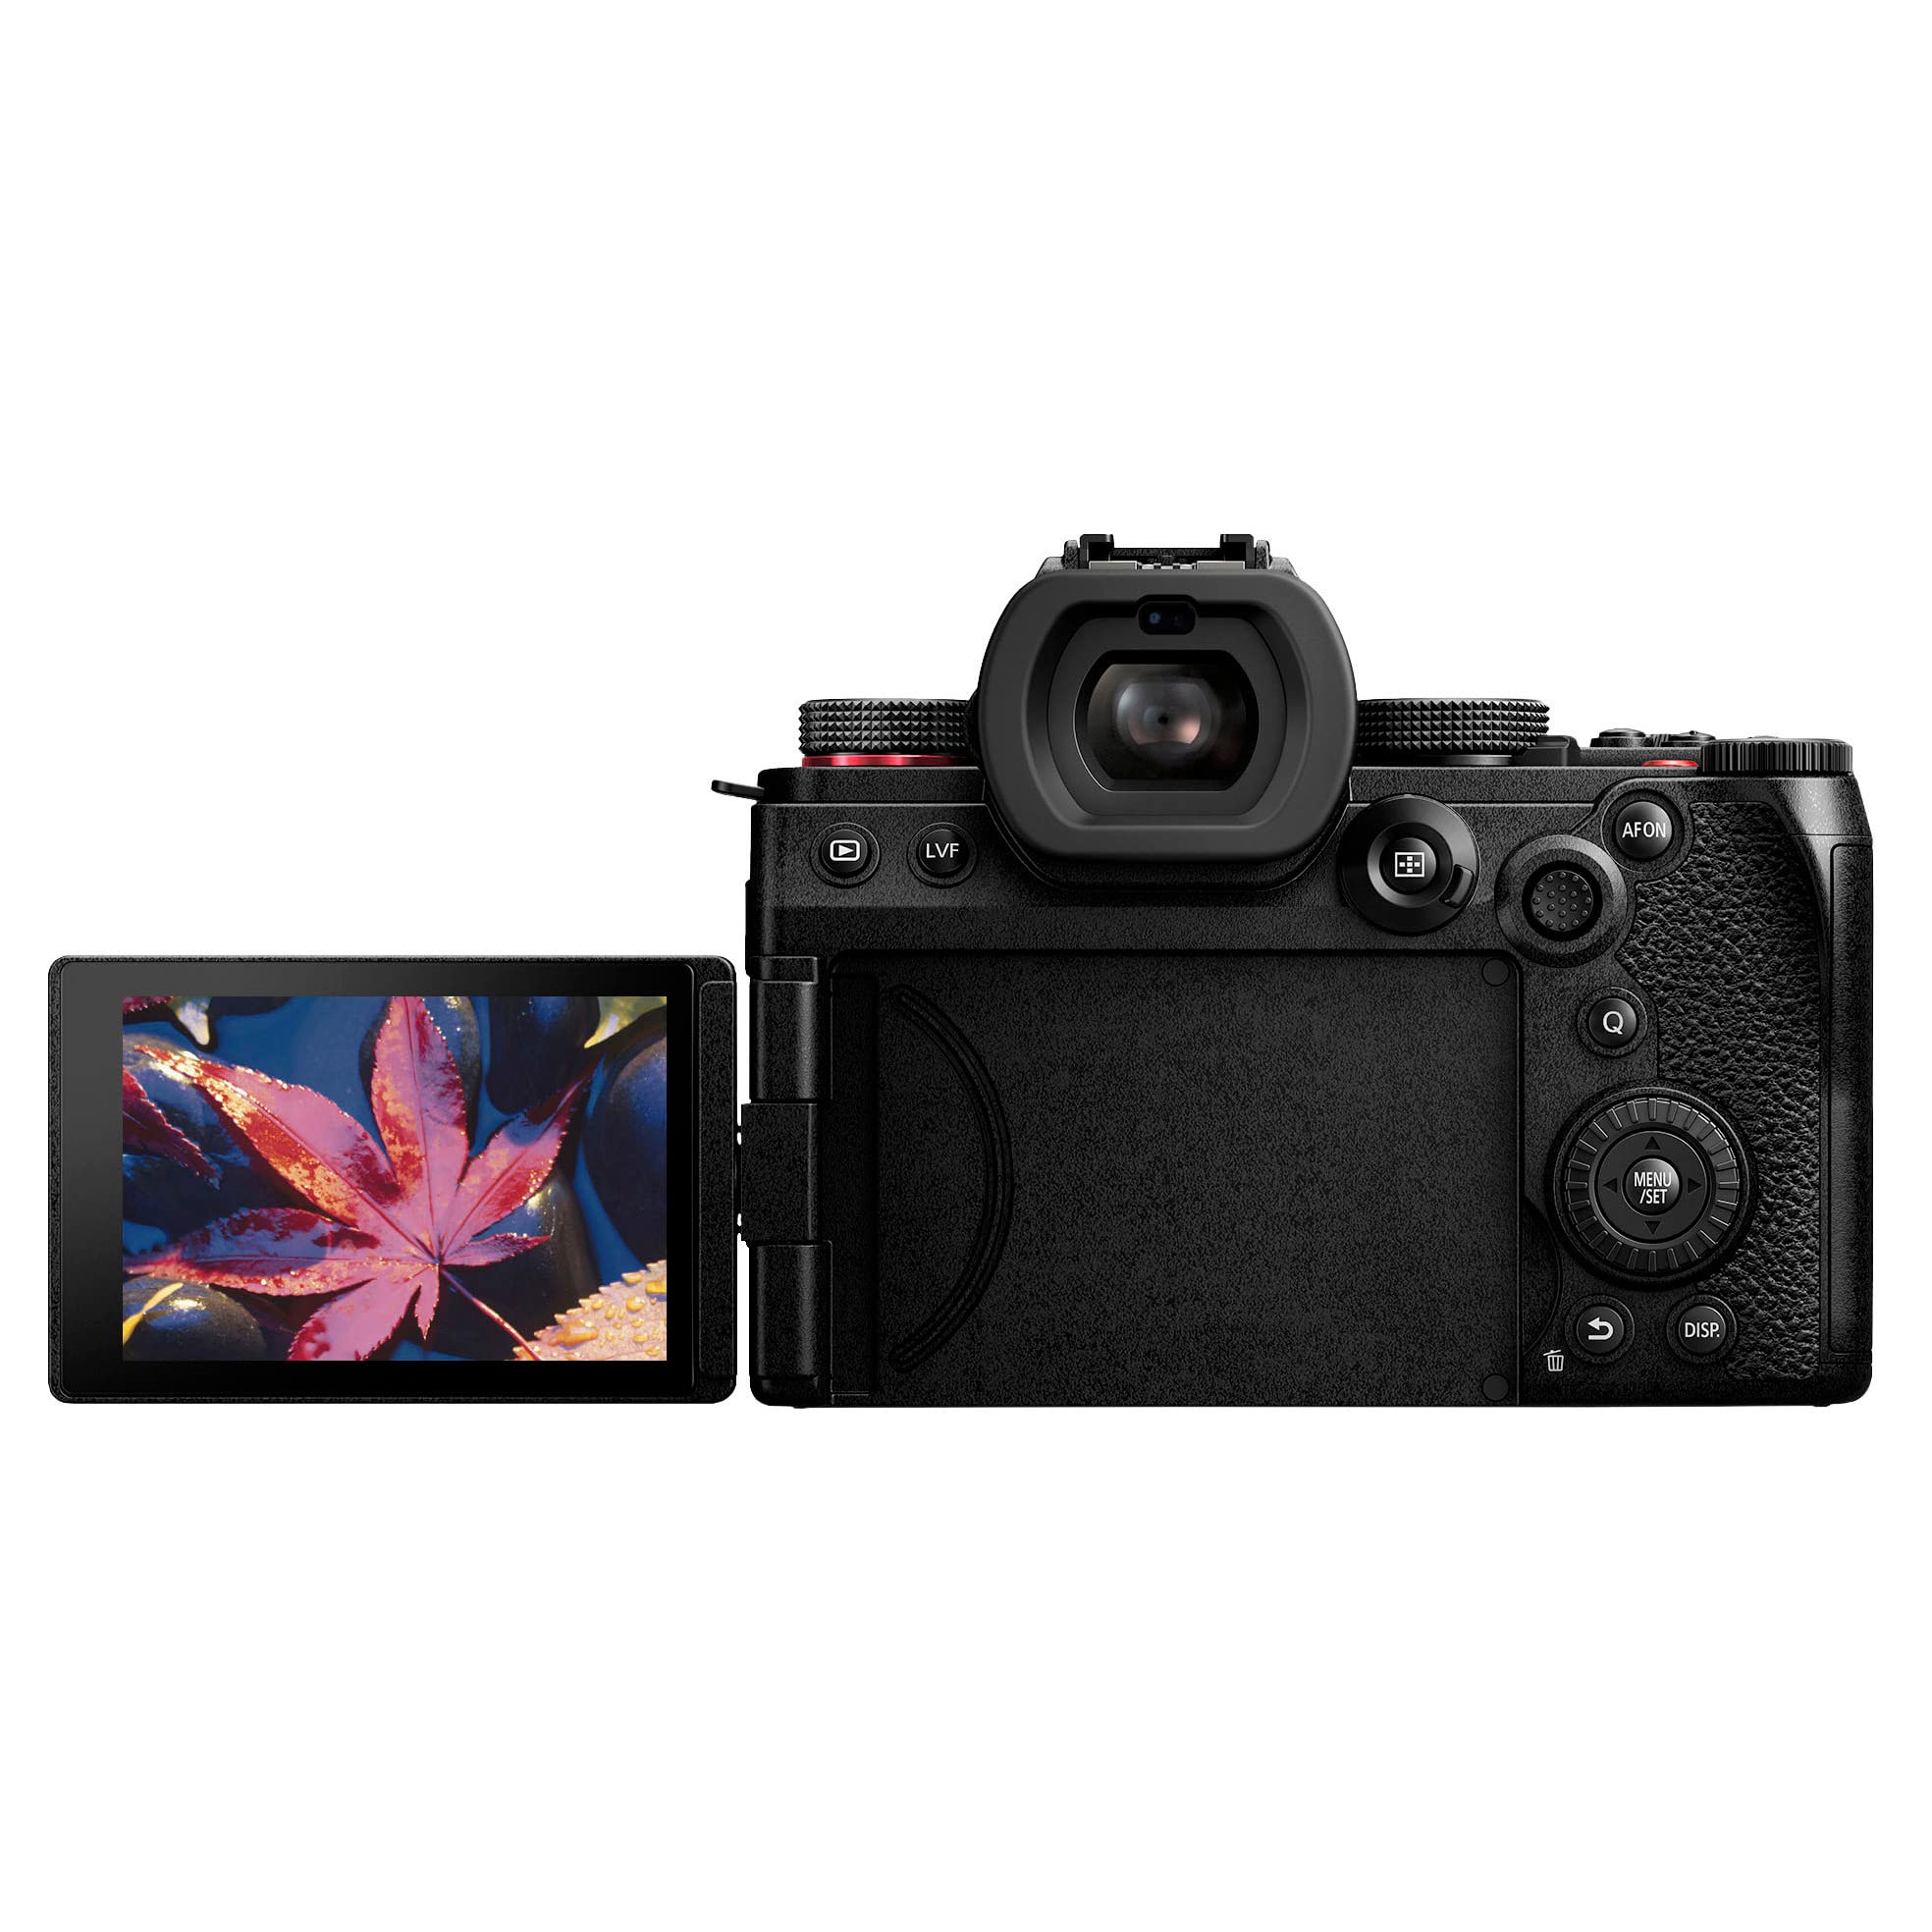 Panasonic LUMIX S5II Hybrid 24.2MP FF Mirrorless Camera with 20-60mm Lens with Battery Bundle with Panasonic DMW-BLK22 7.4V 3050mAh Lithium-ion Battery Pack (2 Items)